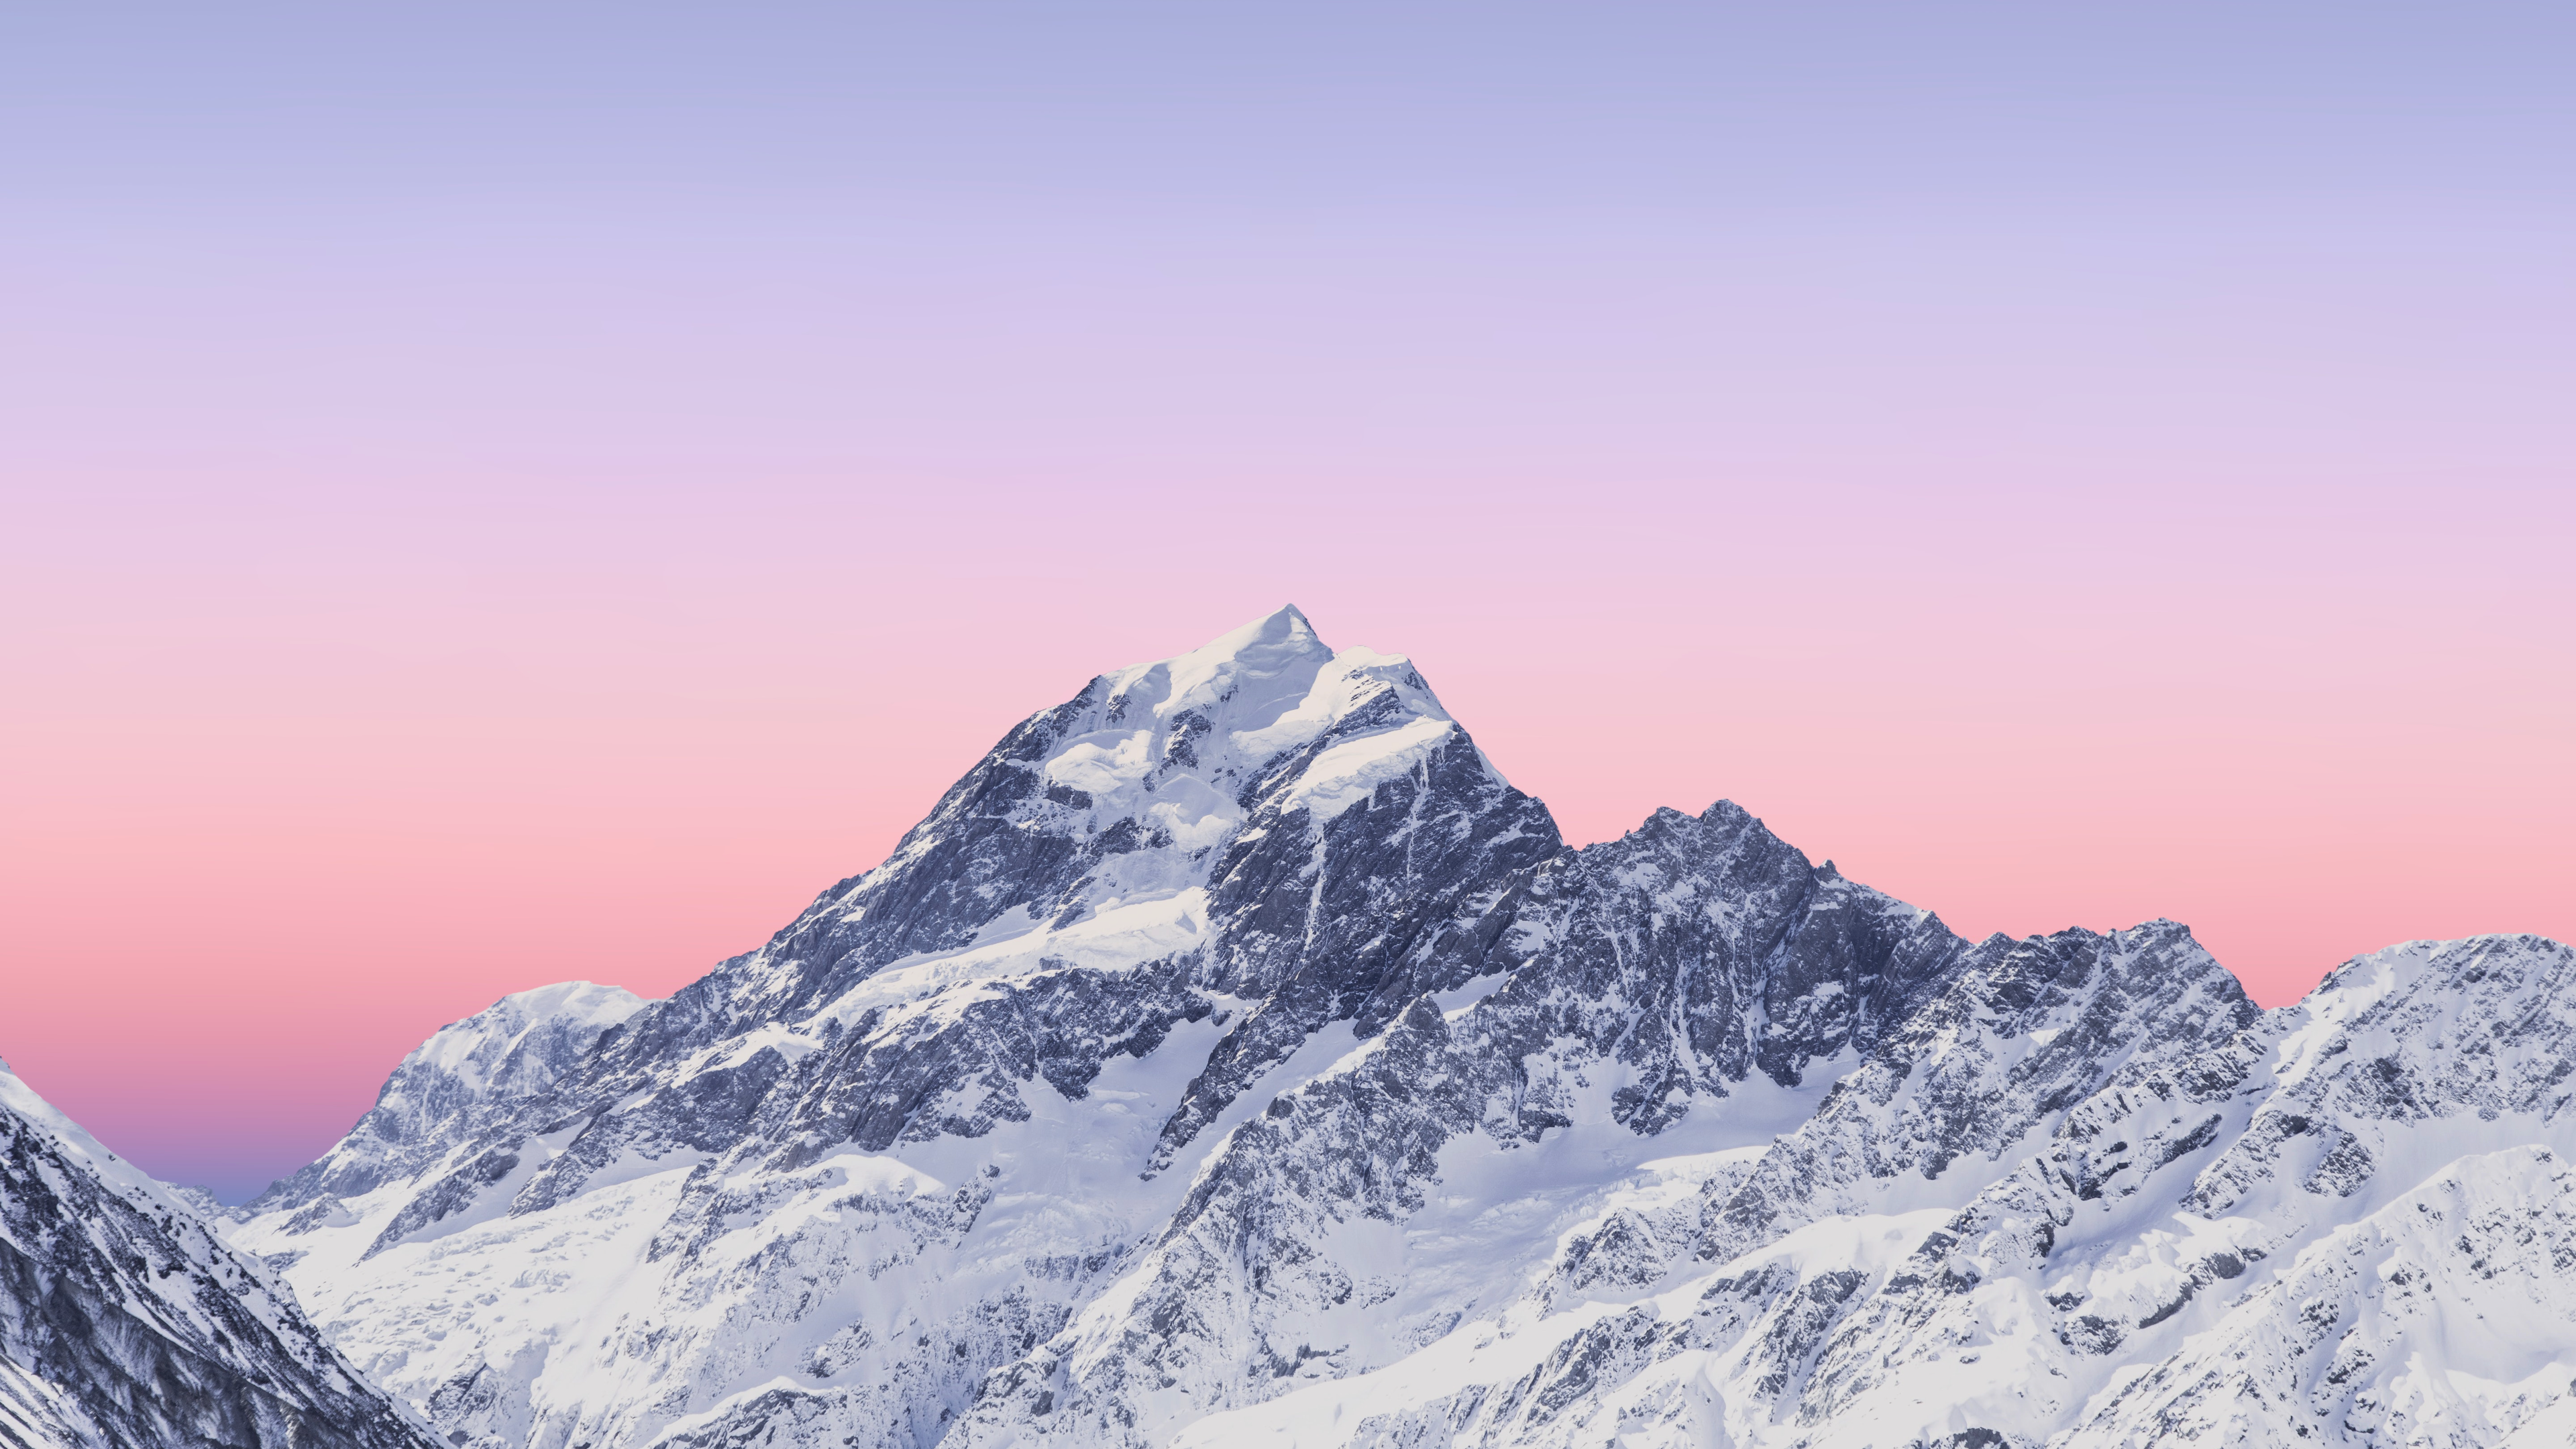 General 3840x2160 nature landscape mountains clear sky snow snowy peak Mount Cook New Zealand